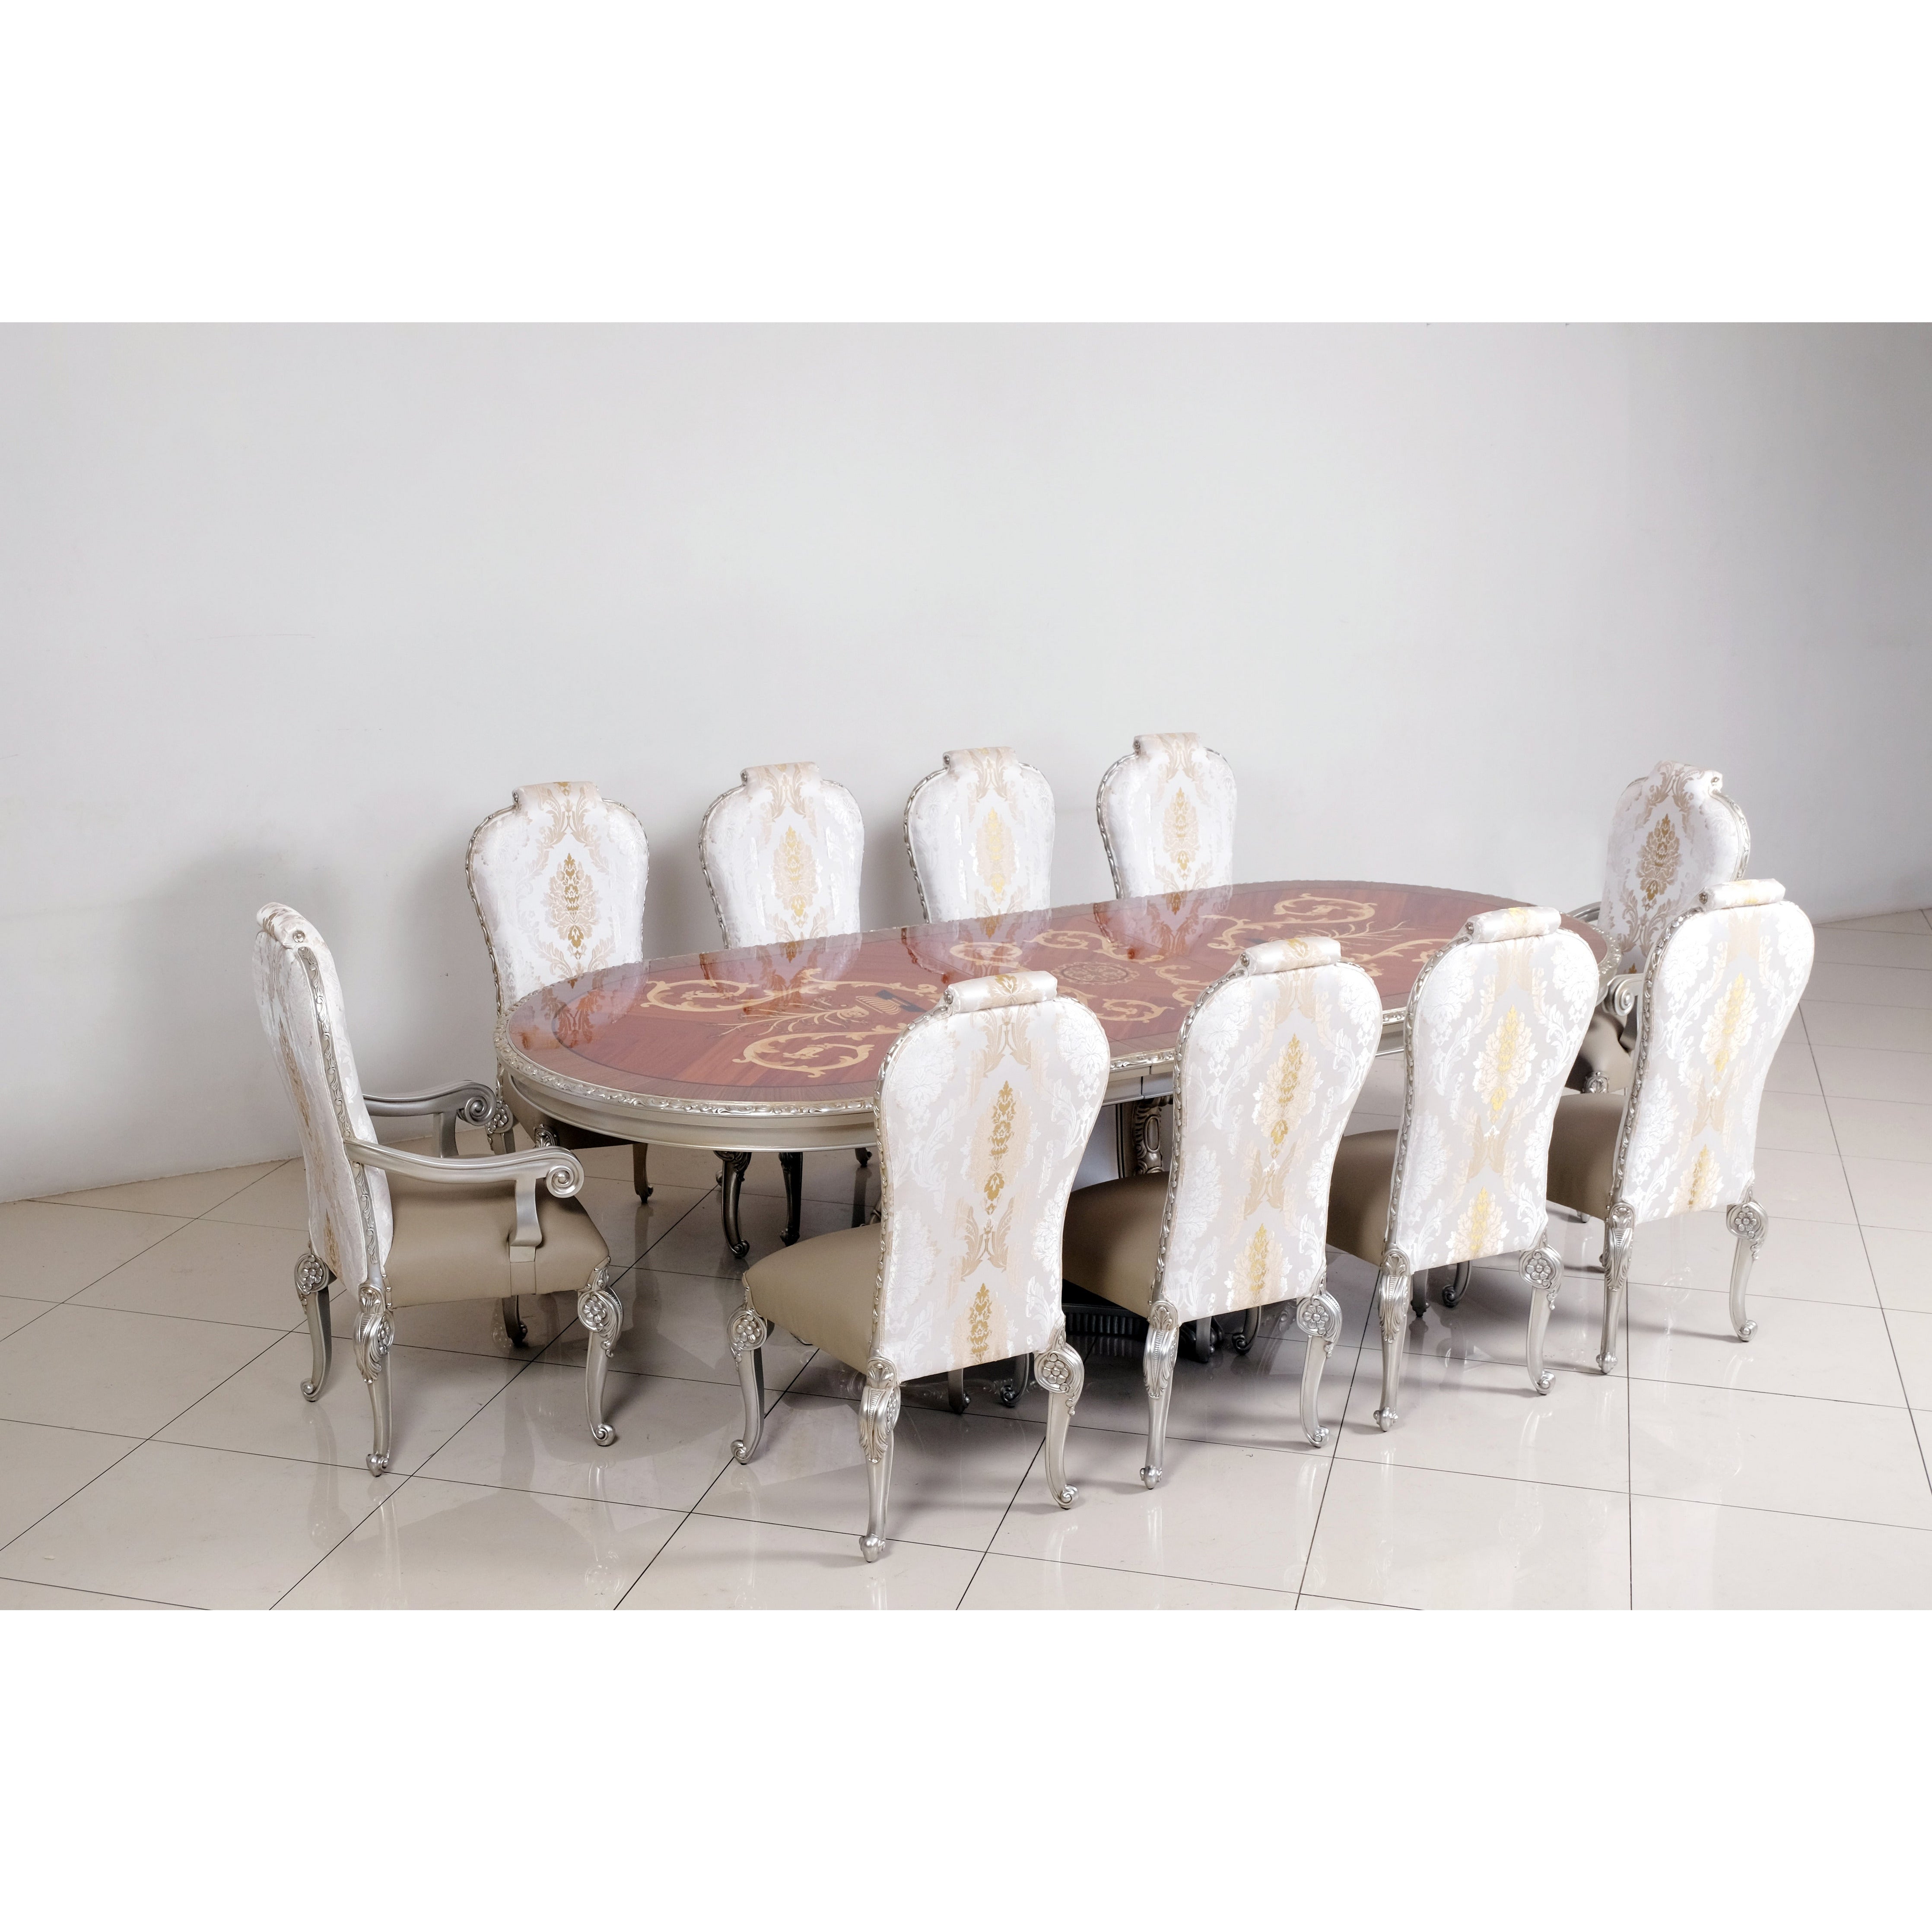 European Furniture - Bellagio 11 Piece Dining Room Set in Natural - 40050-11SET - New Star Living